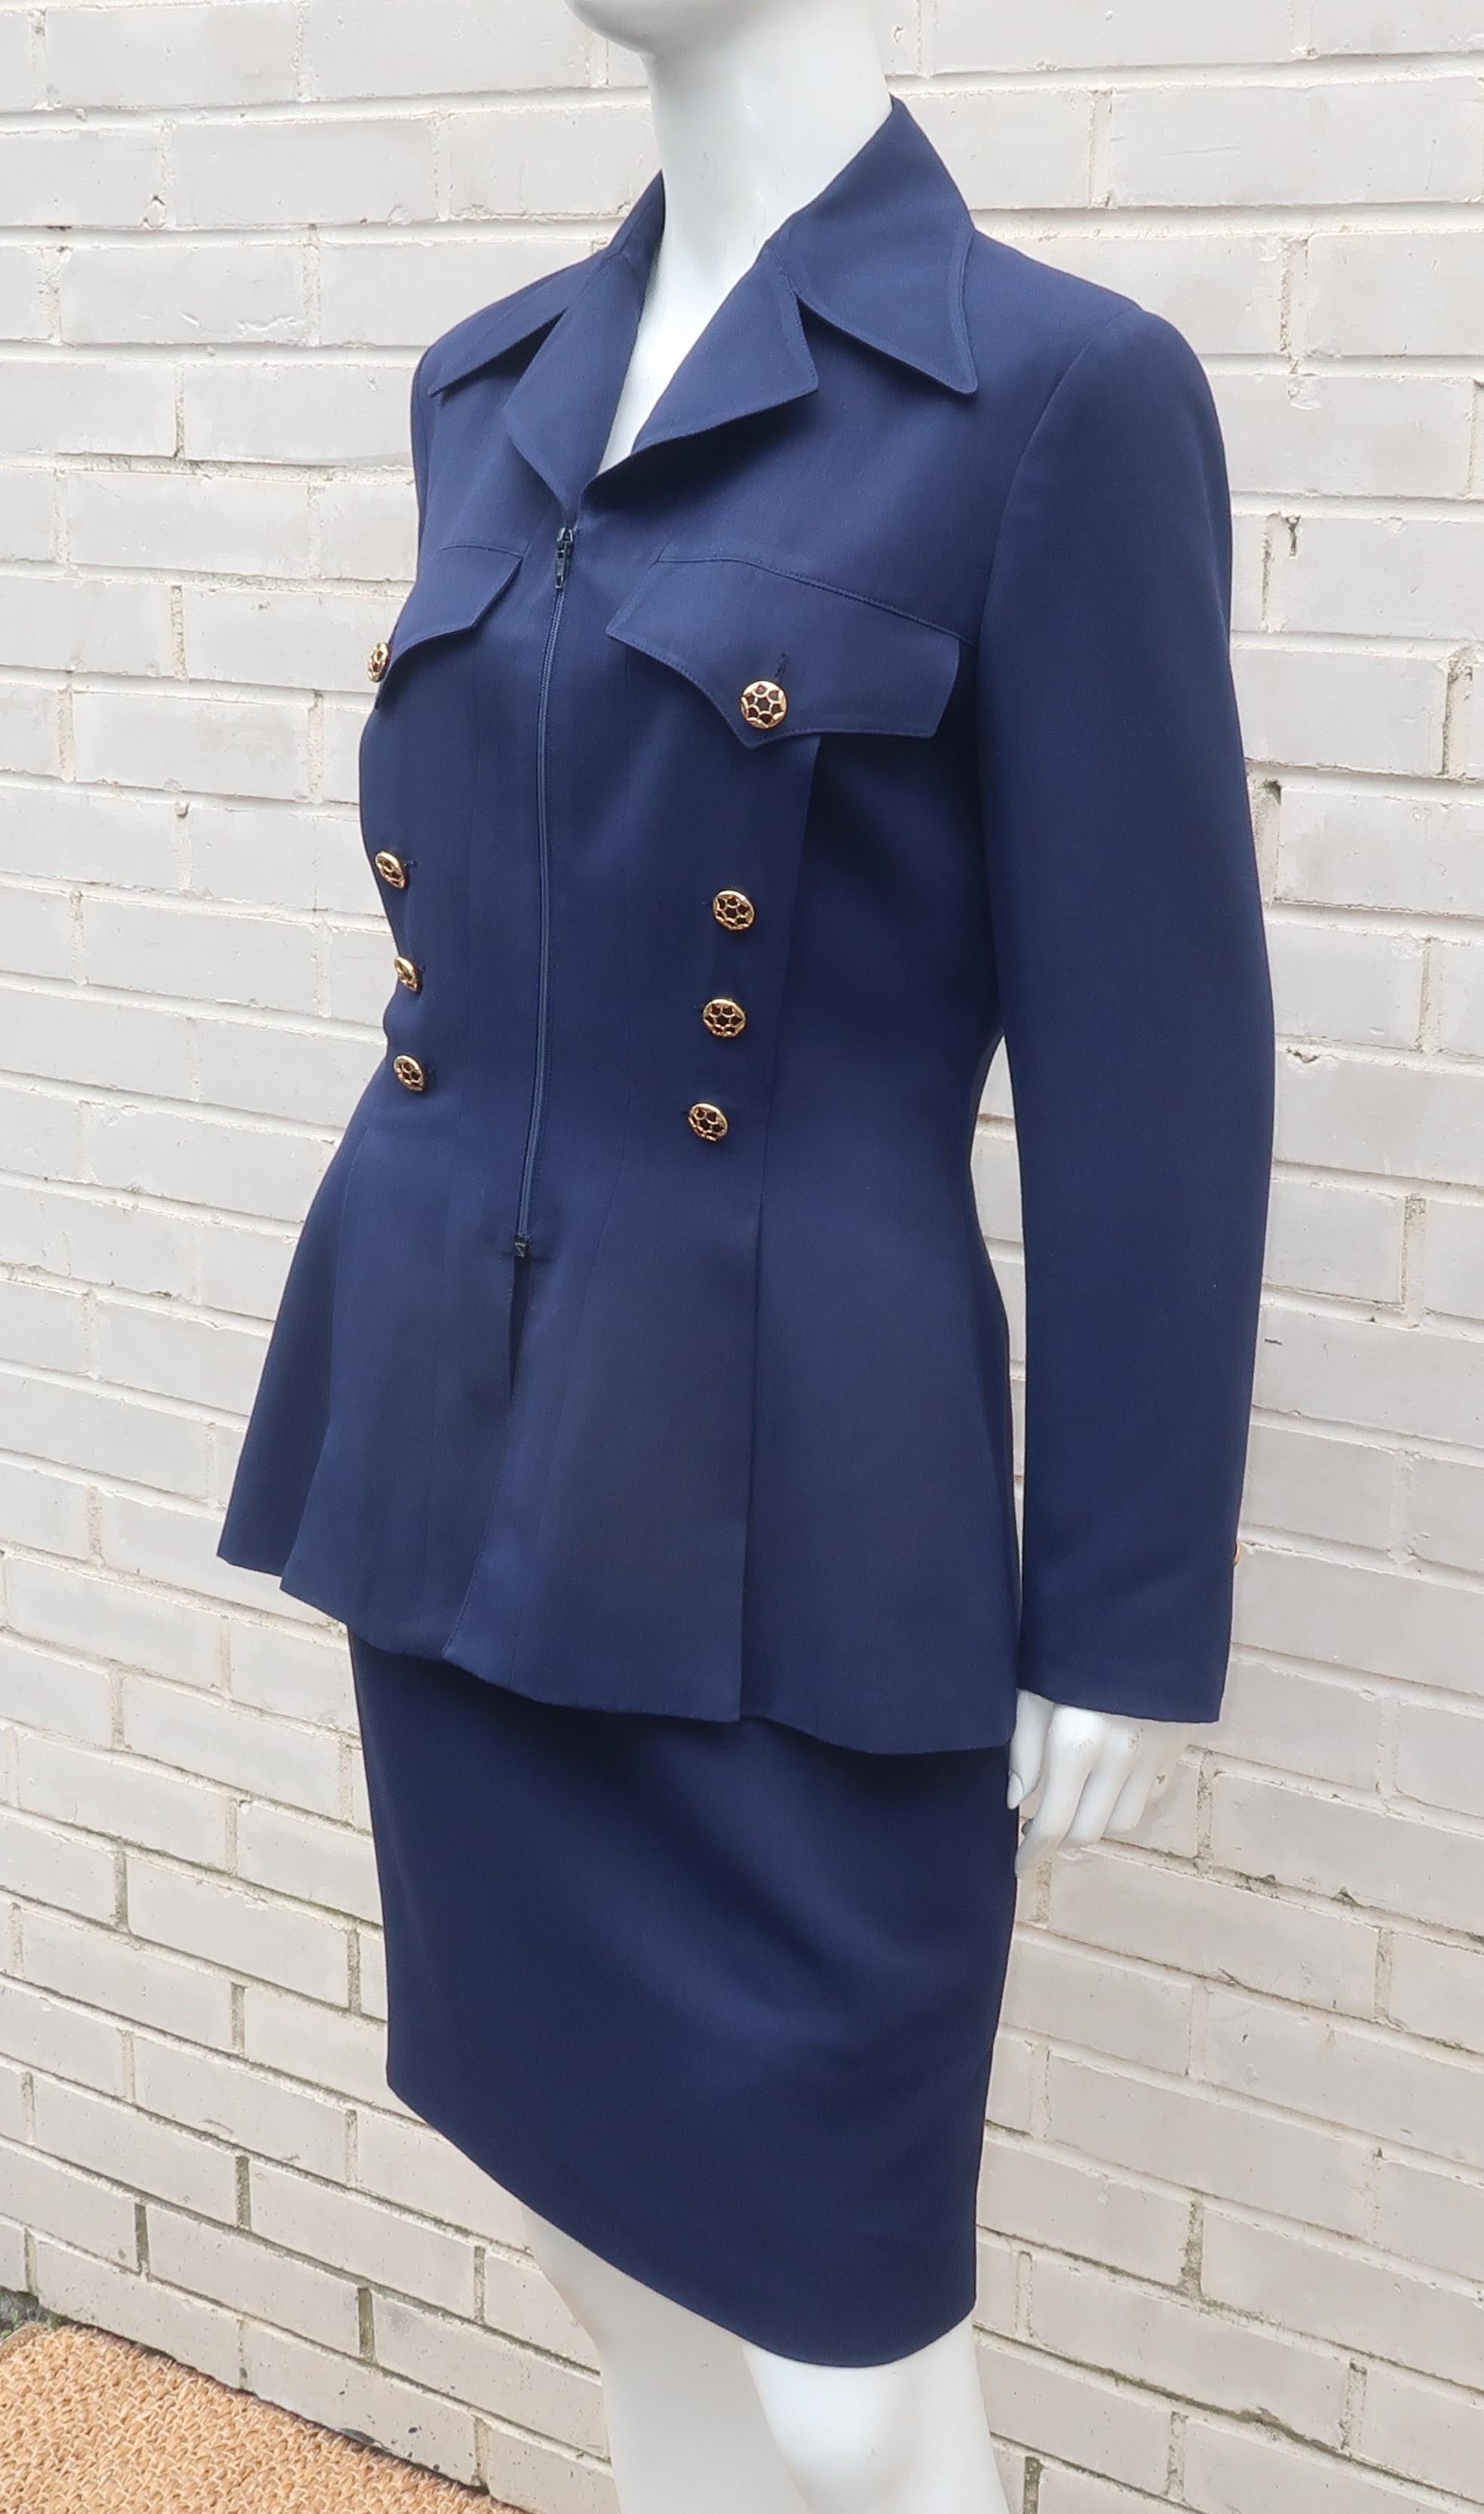 navy suit gold buttons